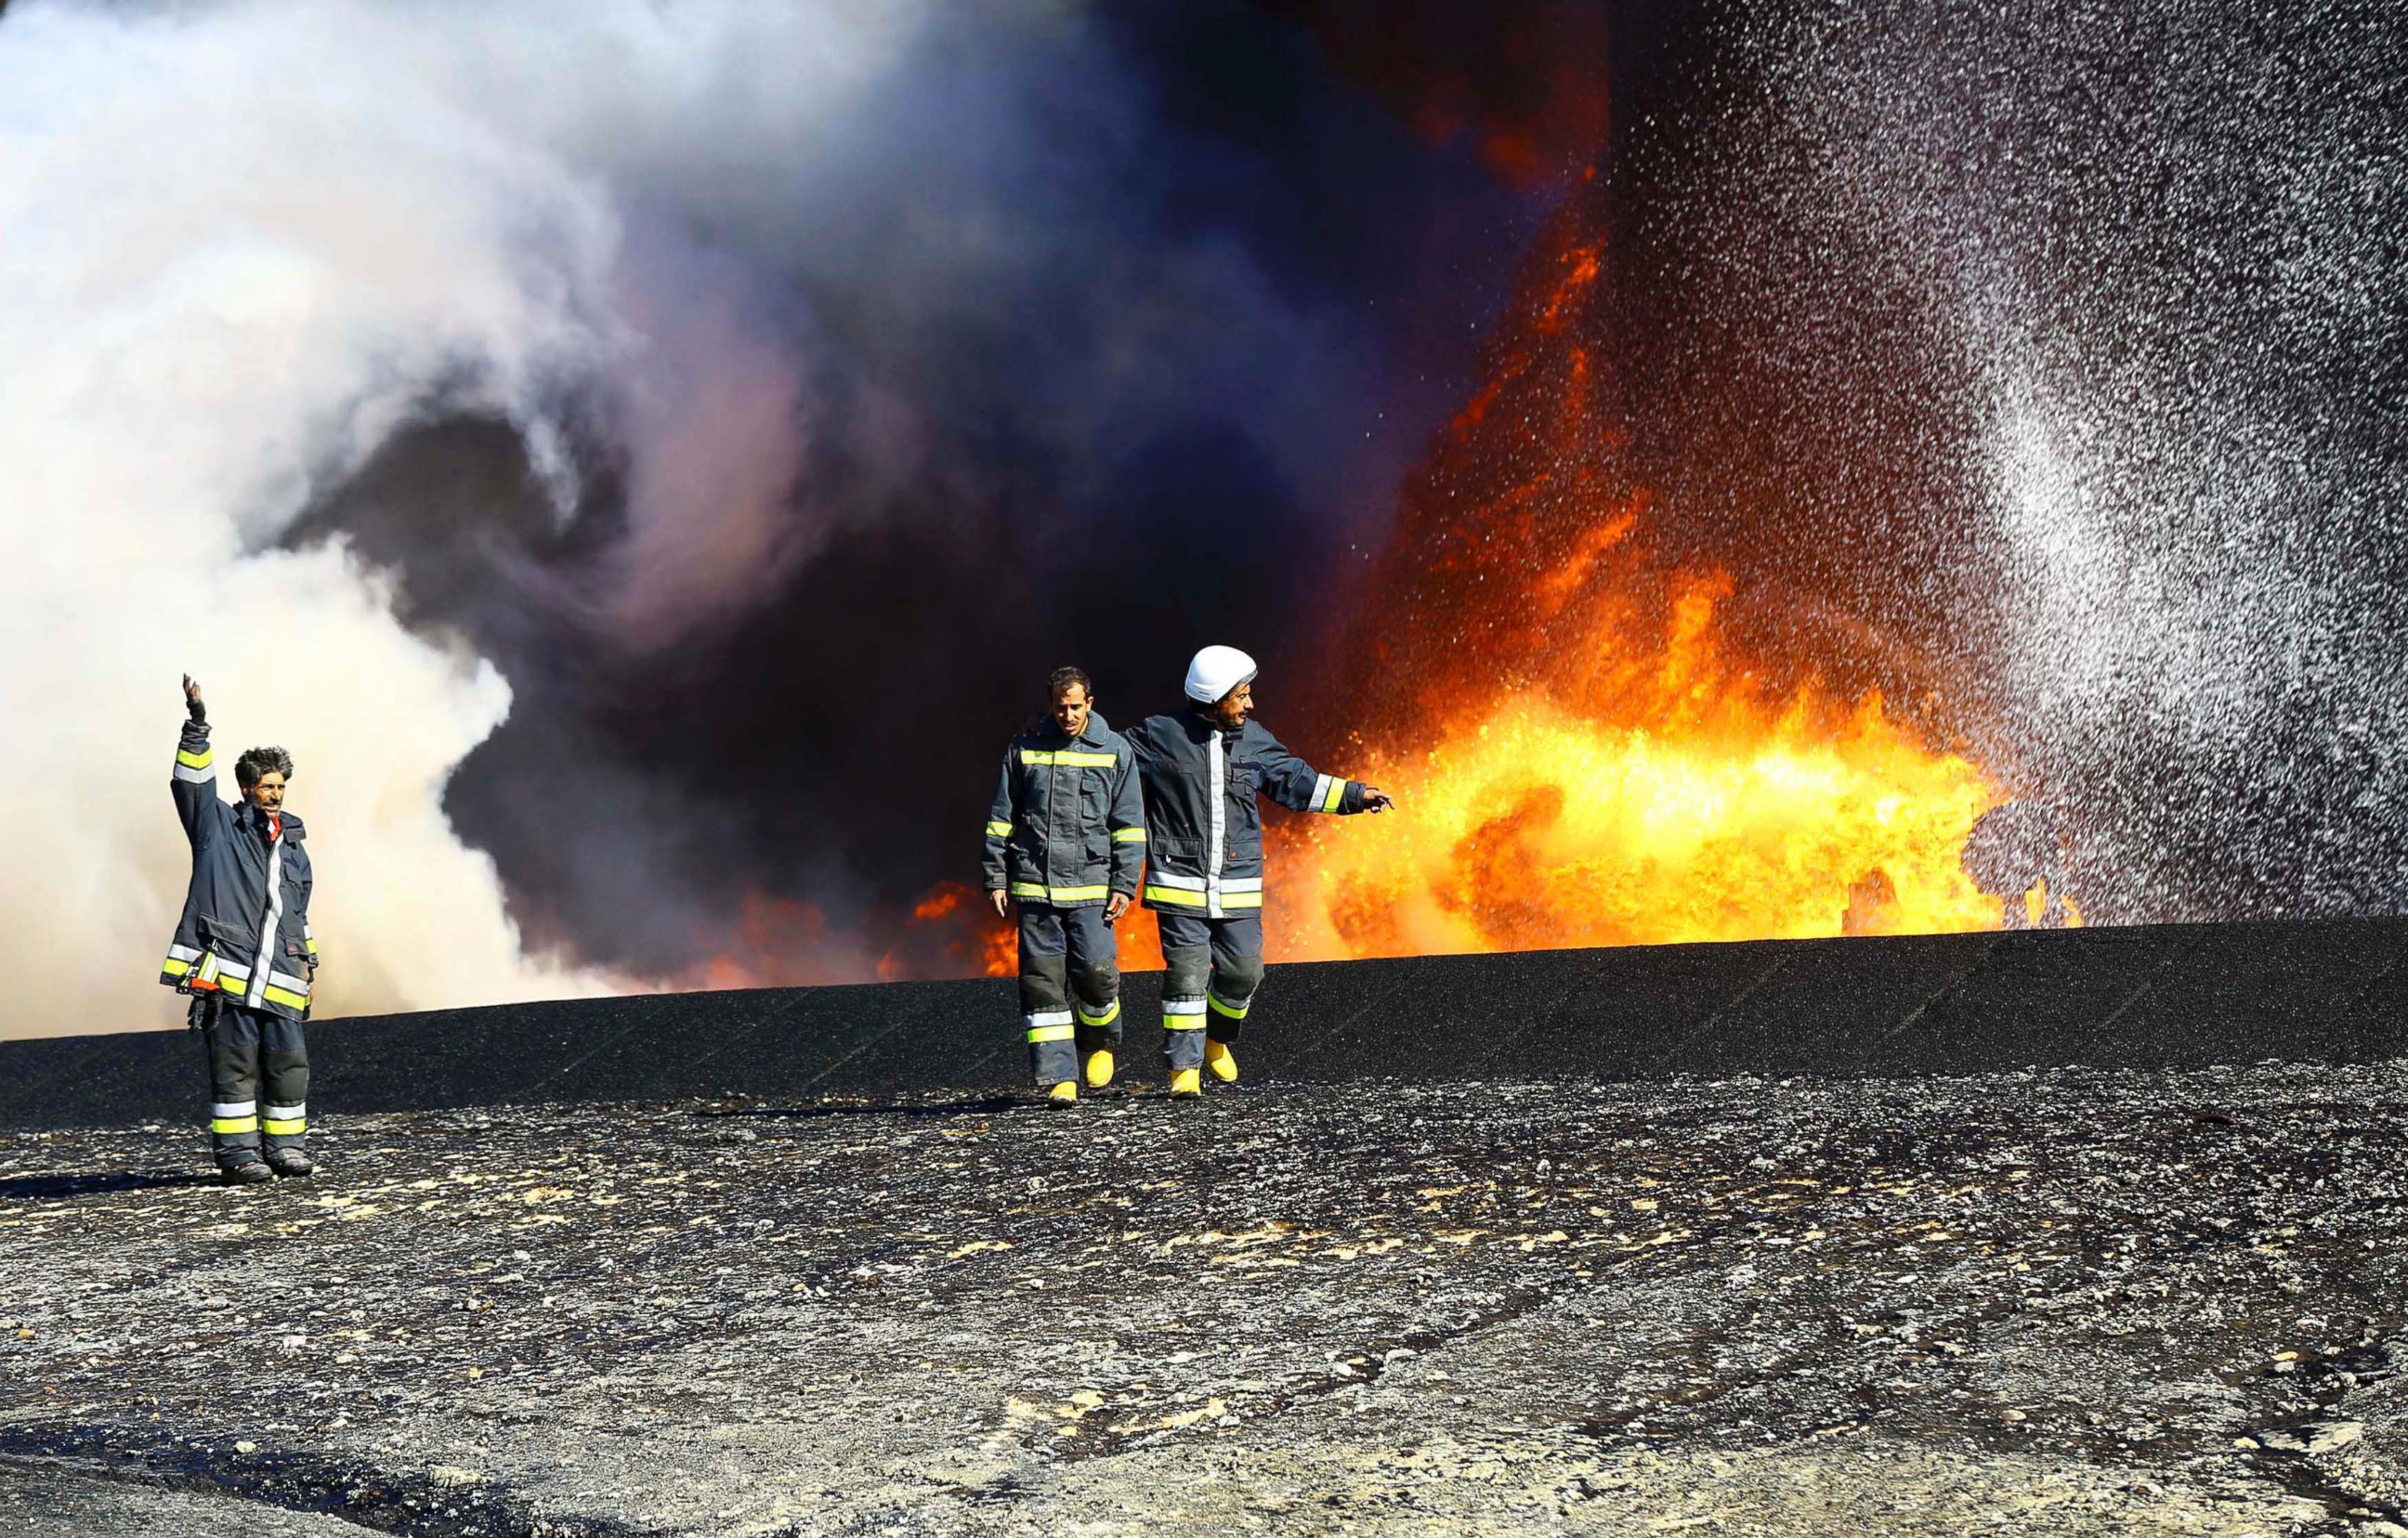 PHOTO: Firefighters walk near the fire of a storage oil tank at the port of Es Sider in Ras Lanuf, Libya in this Dec. 29, 2014 file photo.